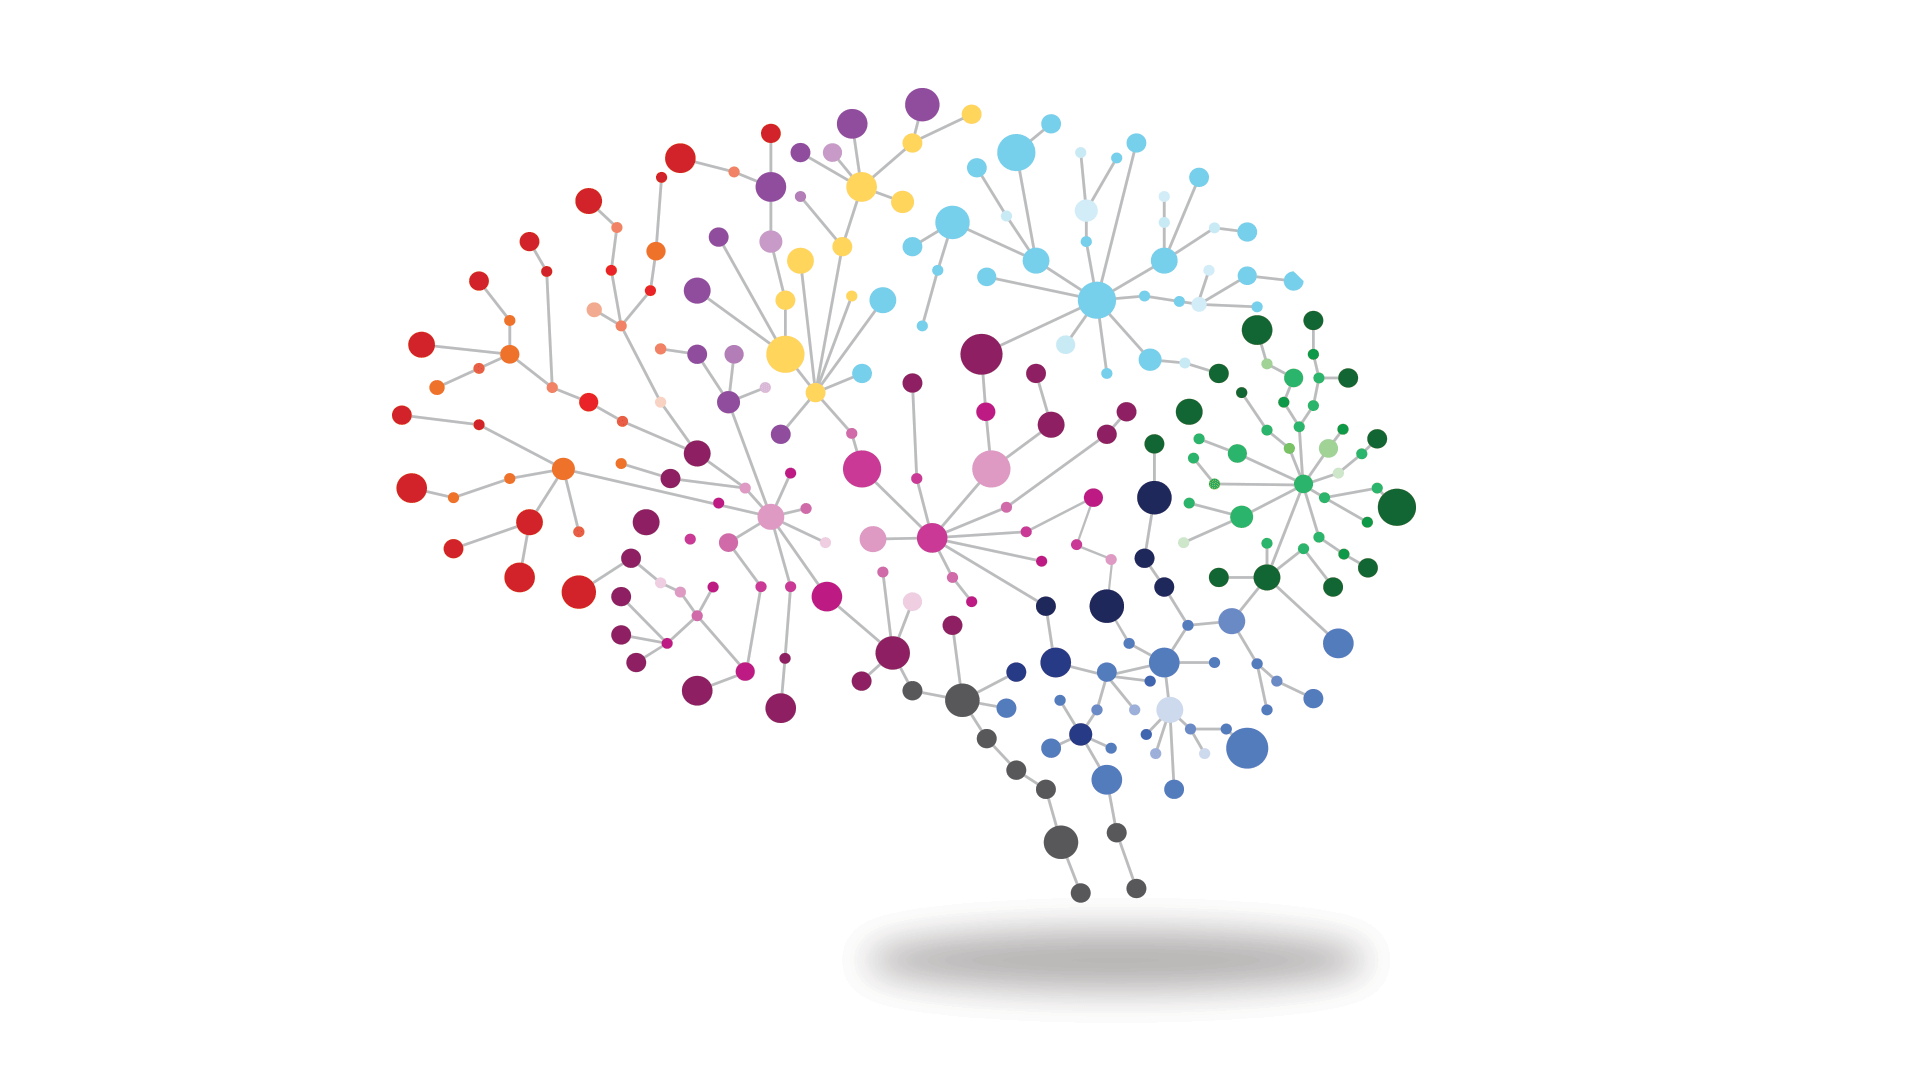 Connecting The Dots - Brain